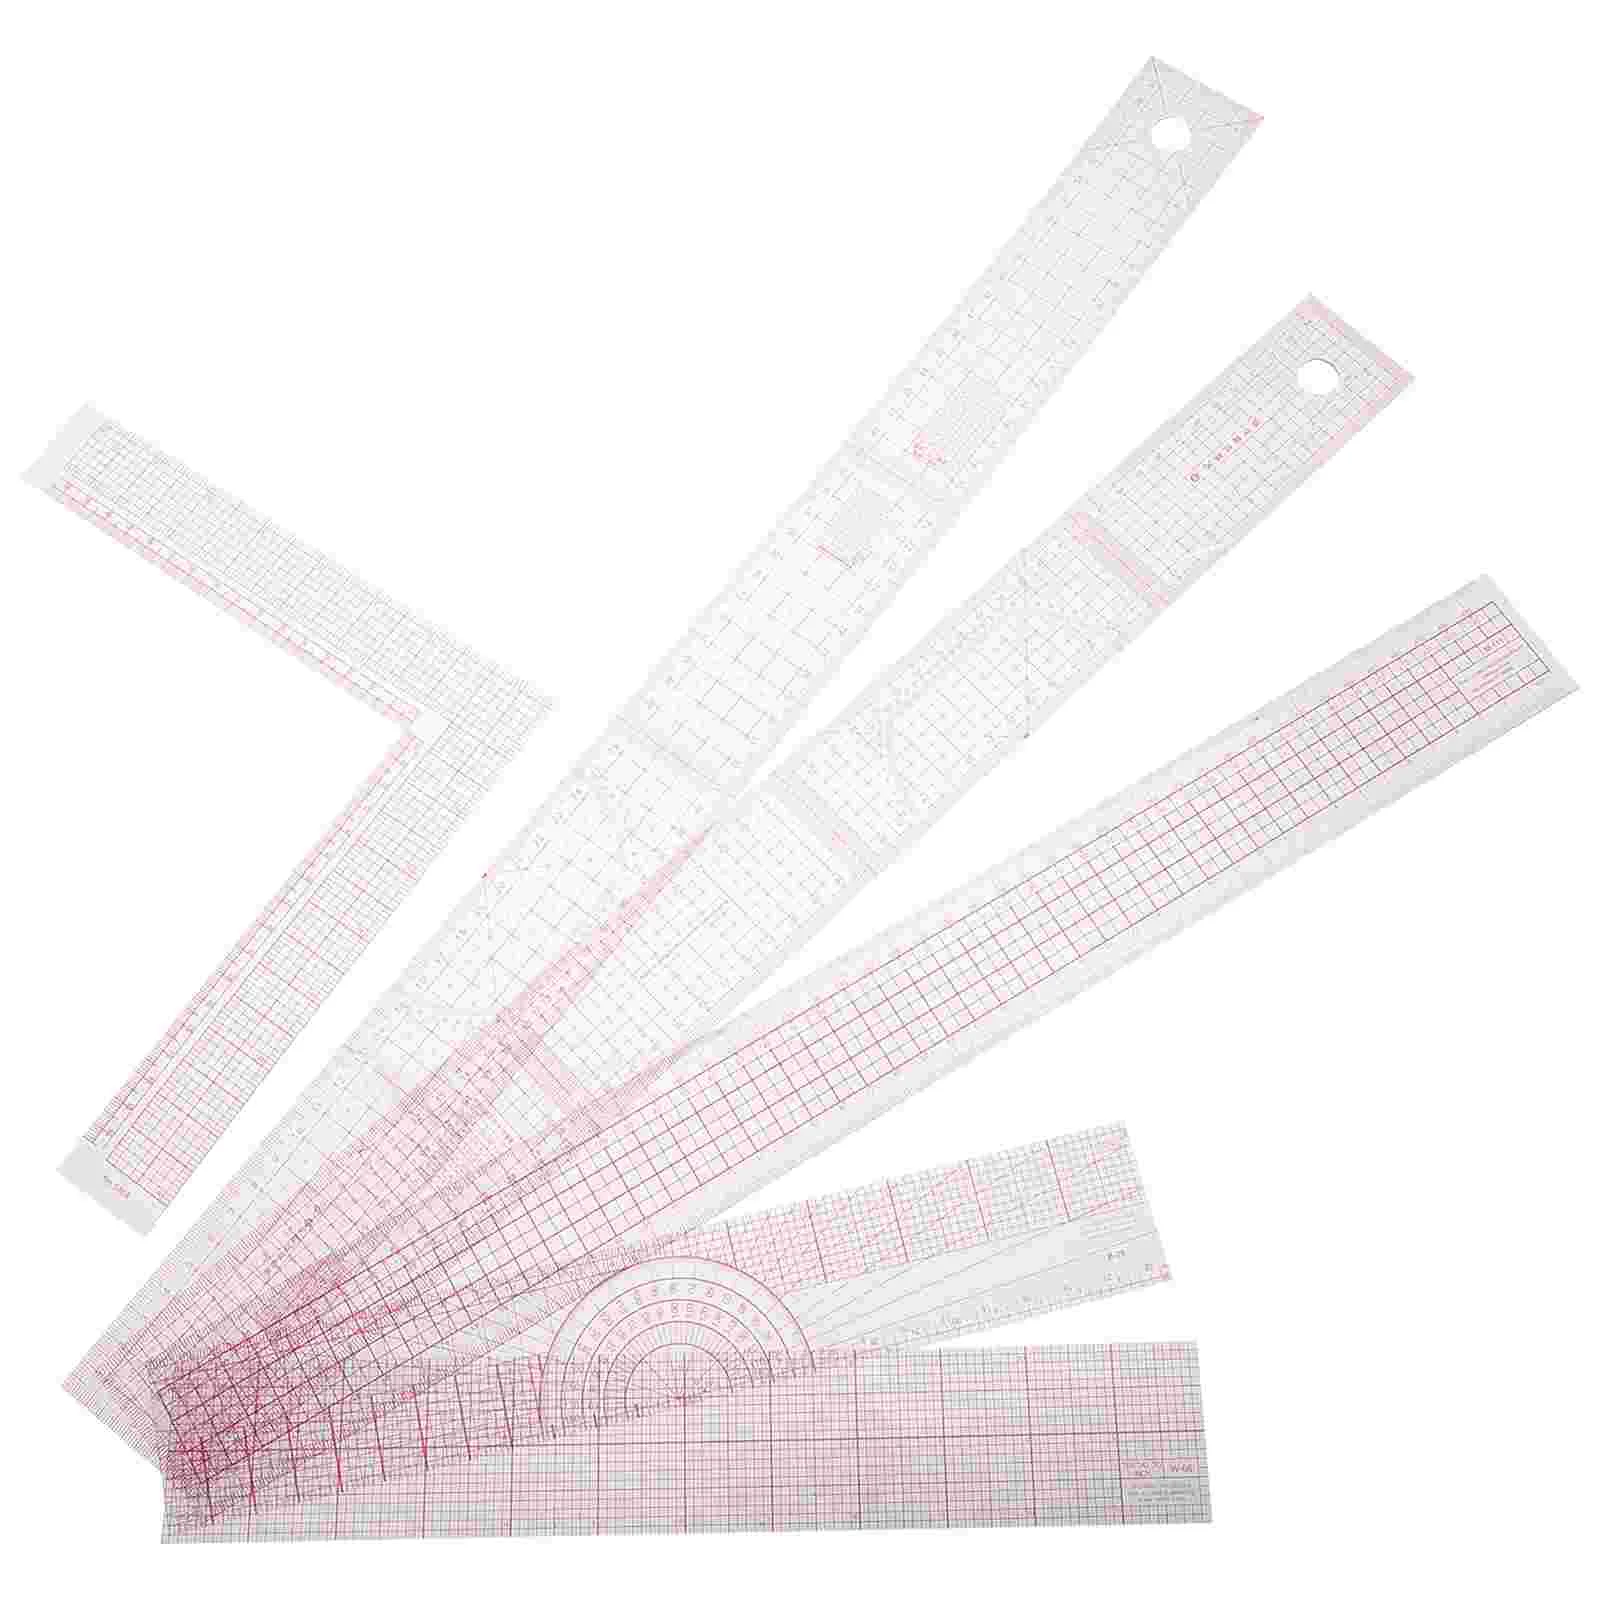 

Ruler Sewing Rulers Set French Tool Tailor Pattern Making Quilting Grading Template Curve Clothing Patterning Square Measureinch